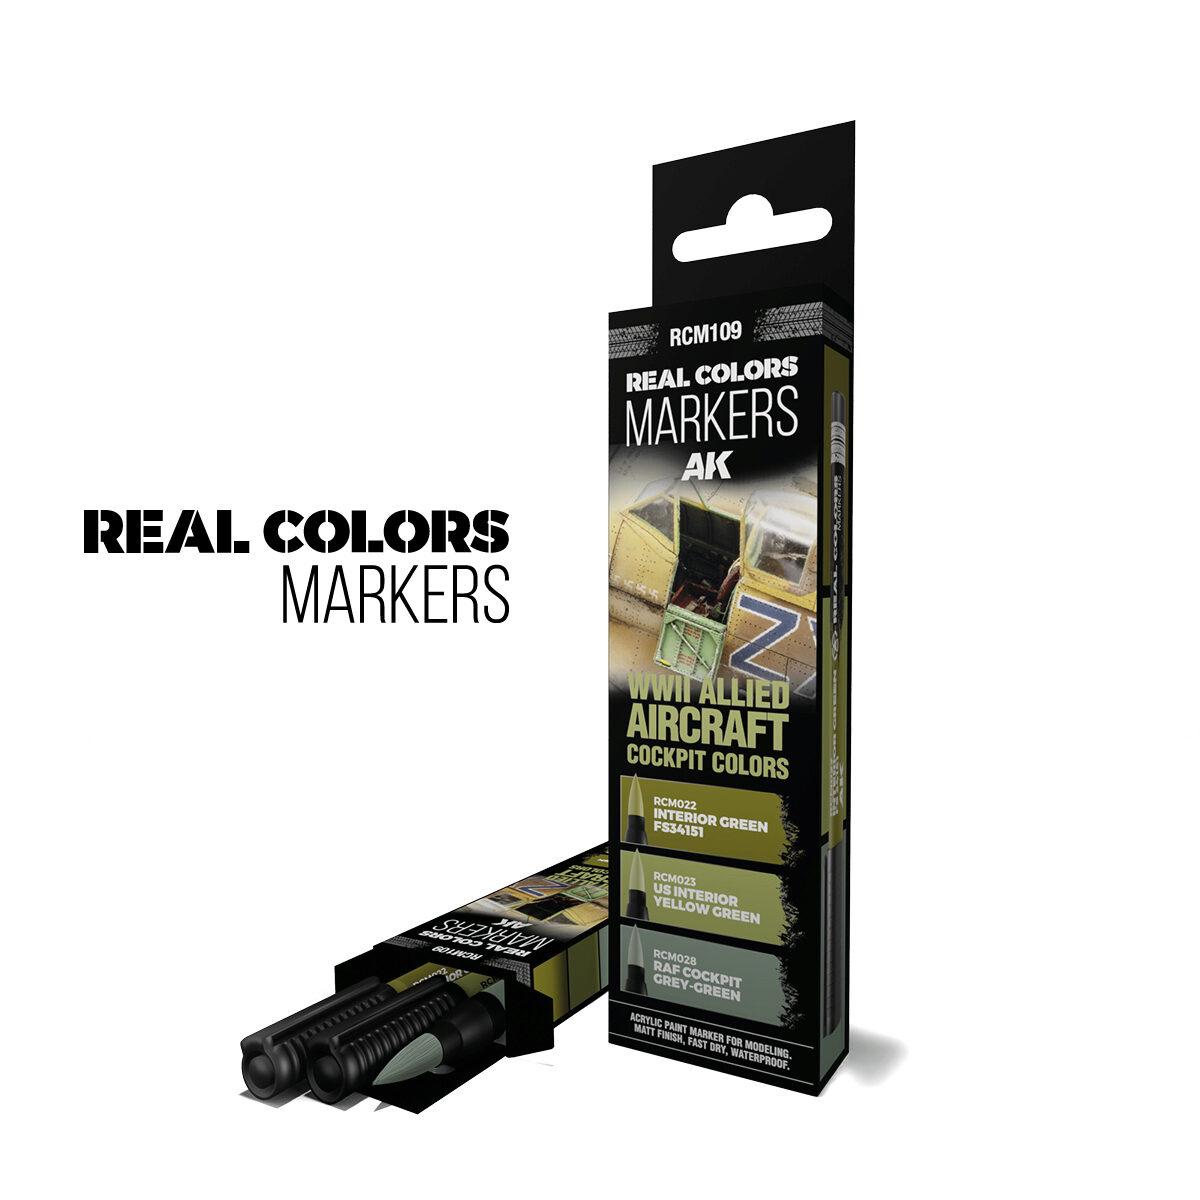 AK RCM109 WWII ALLIED AIRCRAFT COCKPIT COLORS - SET 3 REAL COLORS MARKERS